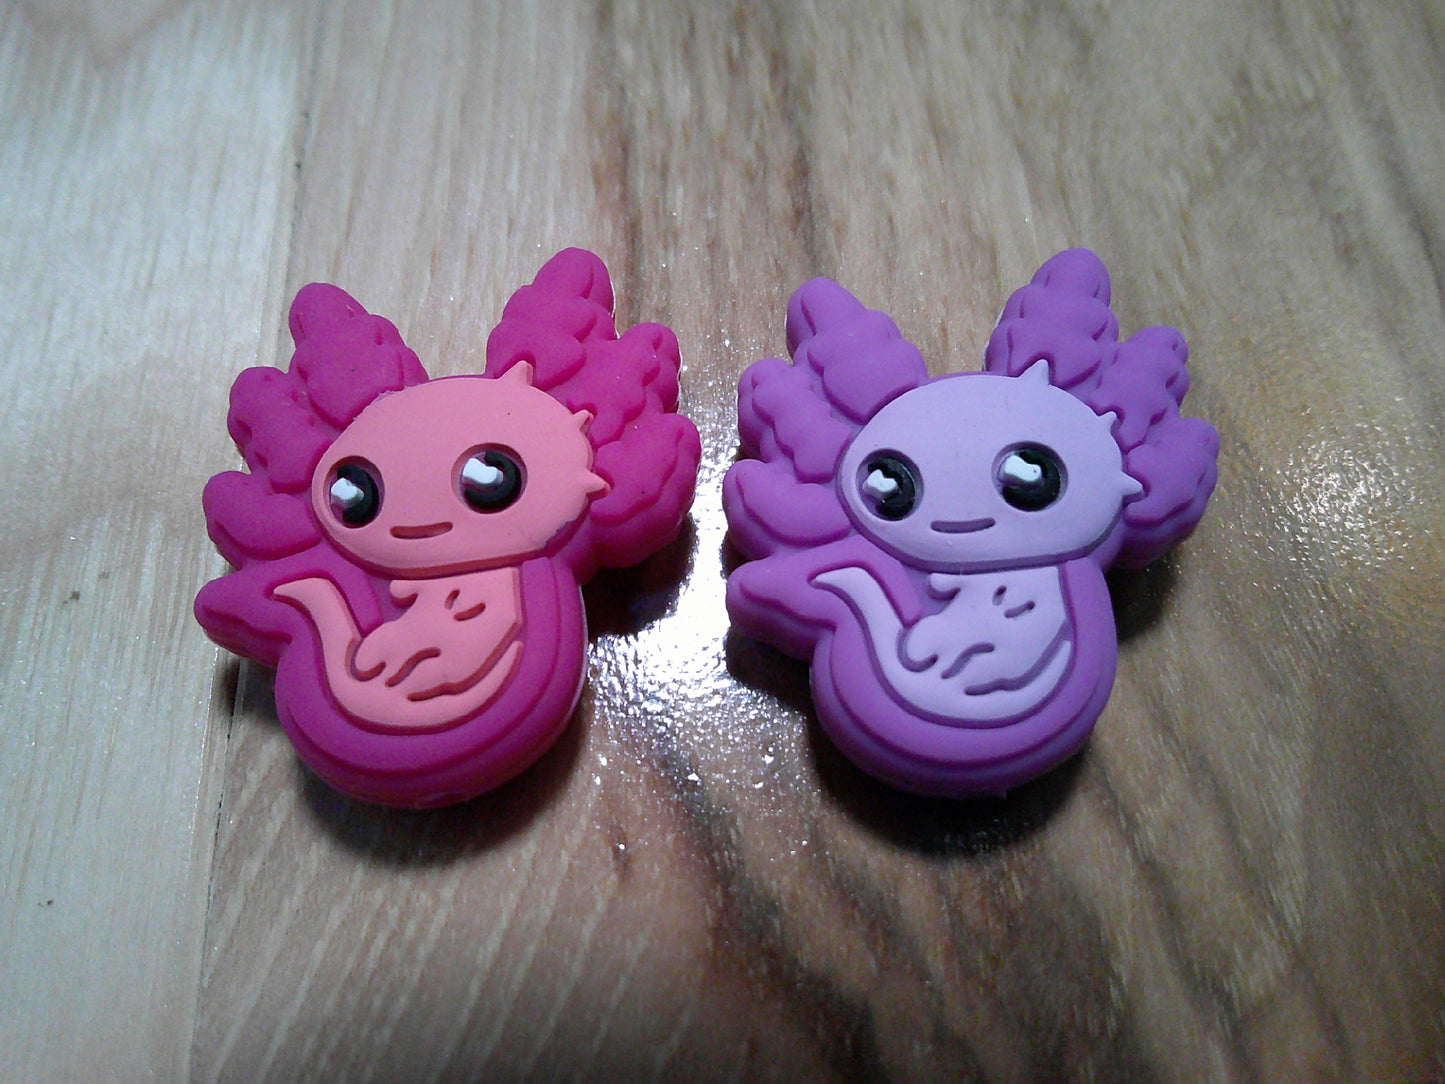 Baby Axolotl fish- stitch stoppers